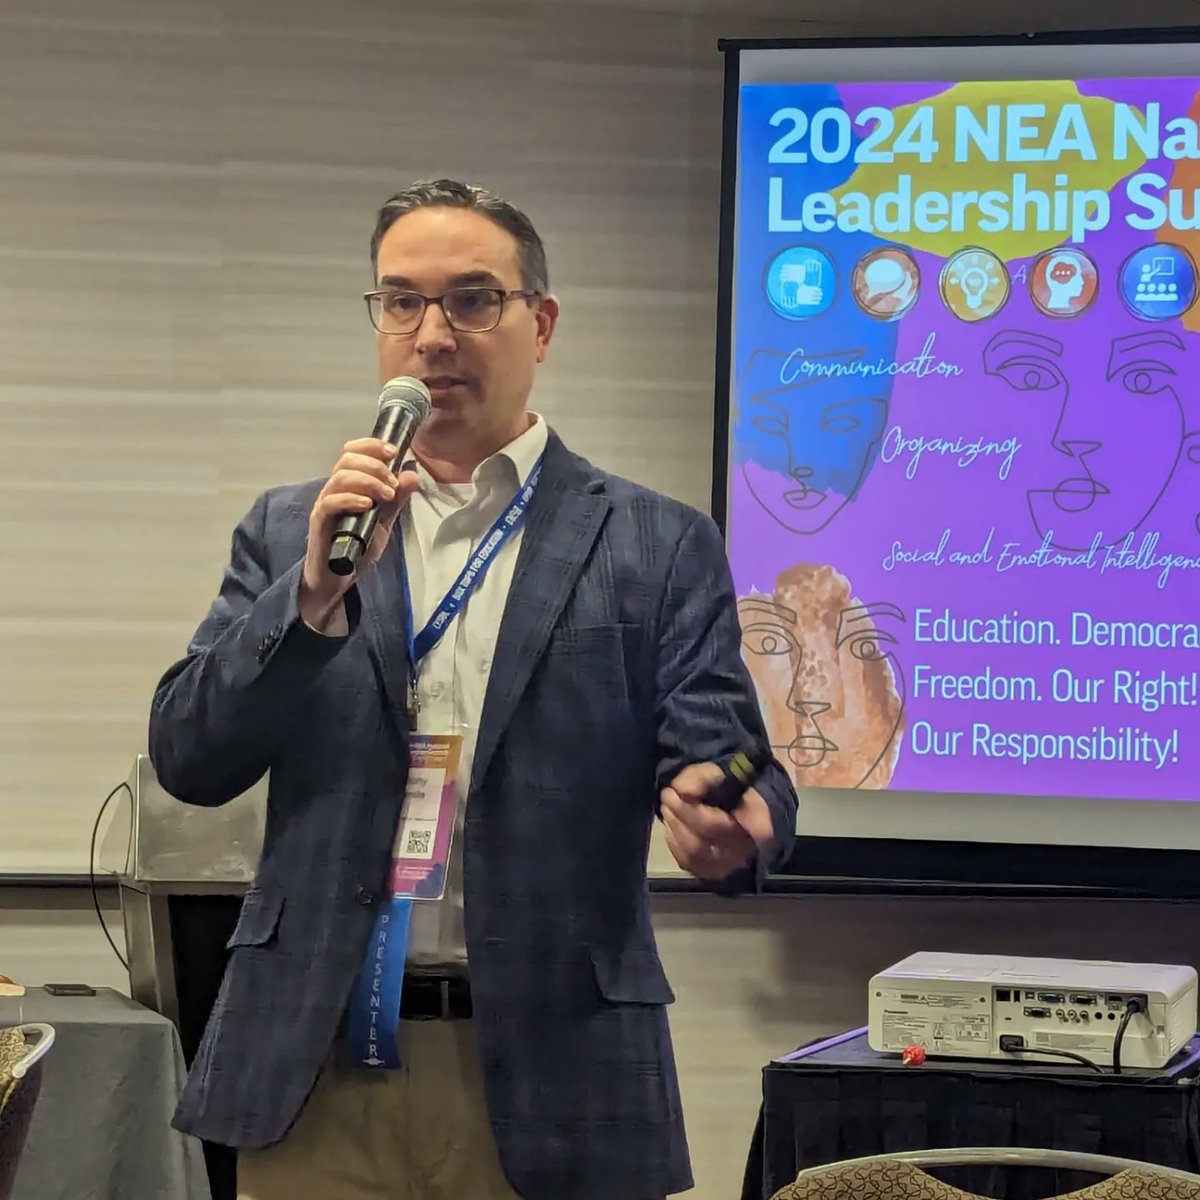 Bloomfield EA/Essex County EA spent part of Day 2 of the National Leadership Summit learning from NJEA Uniserv Consultant Anthony Rosamilia. @ECEANJORG @NJEA @NEAToday